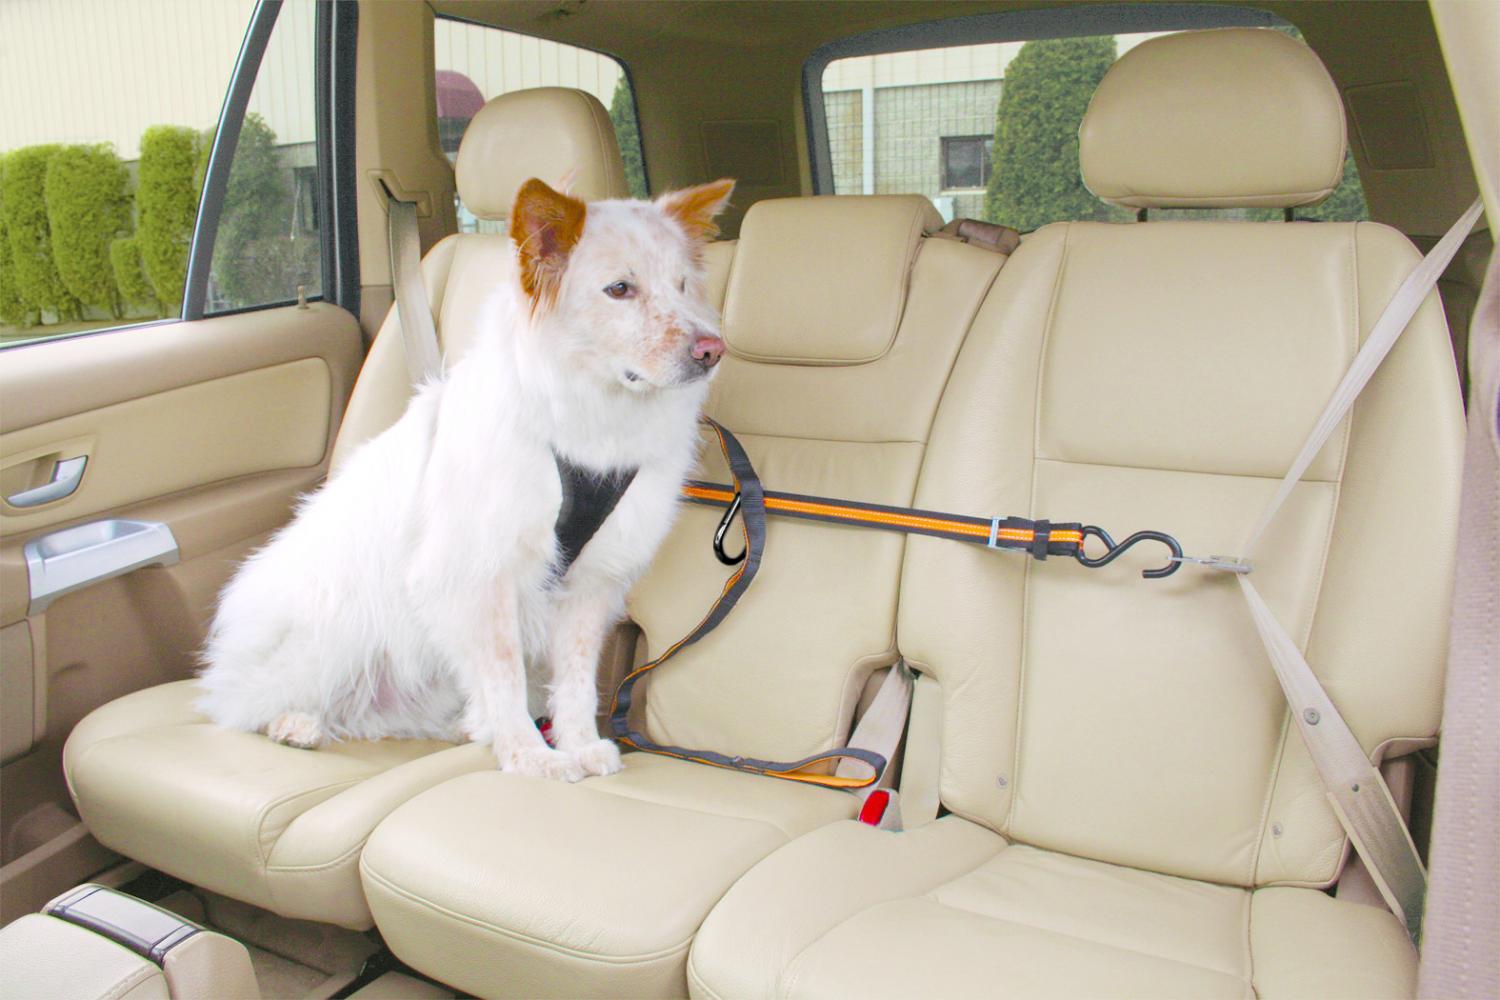 Dog Car Zipline - Safety Auto zip line for dogs